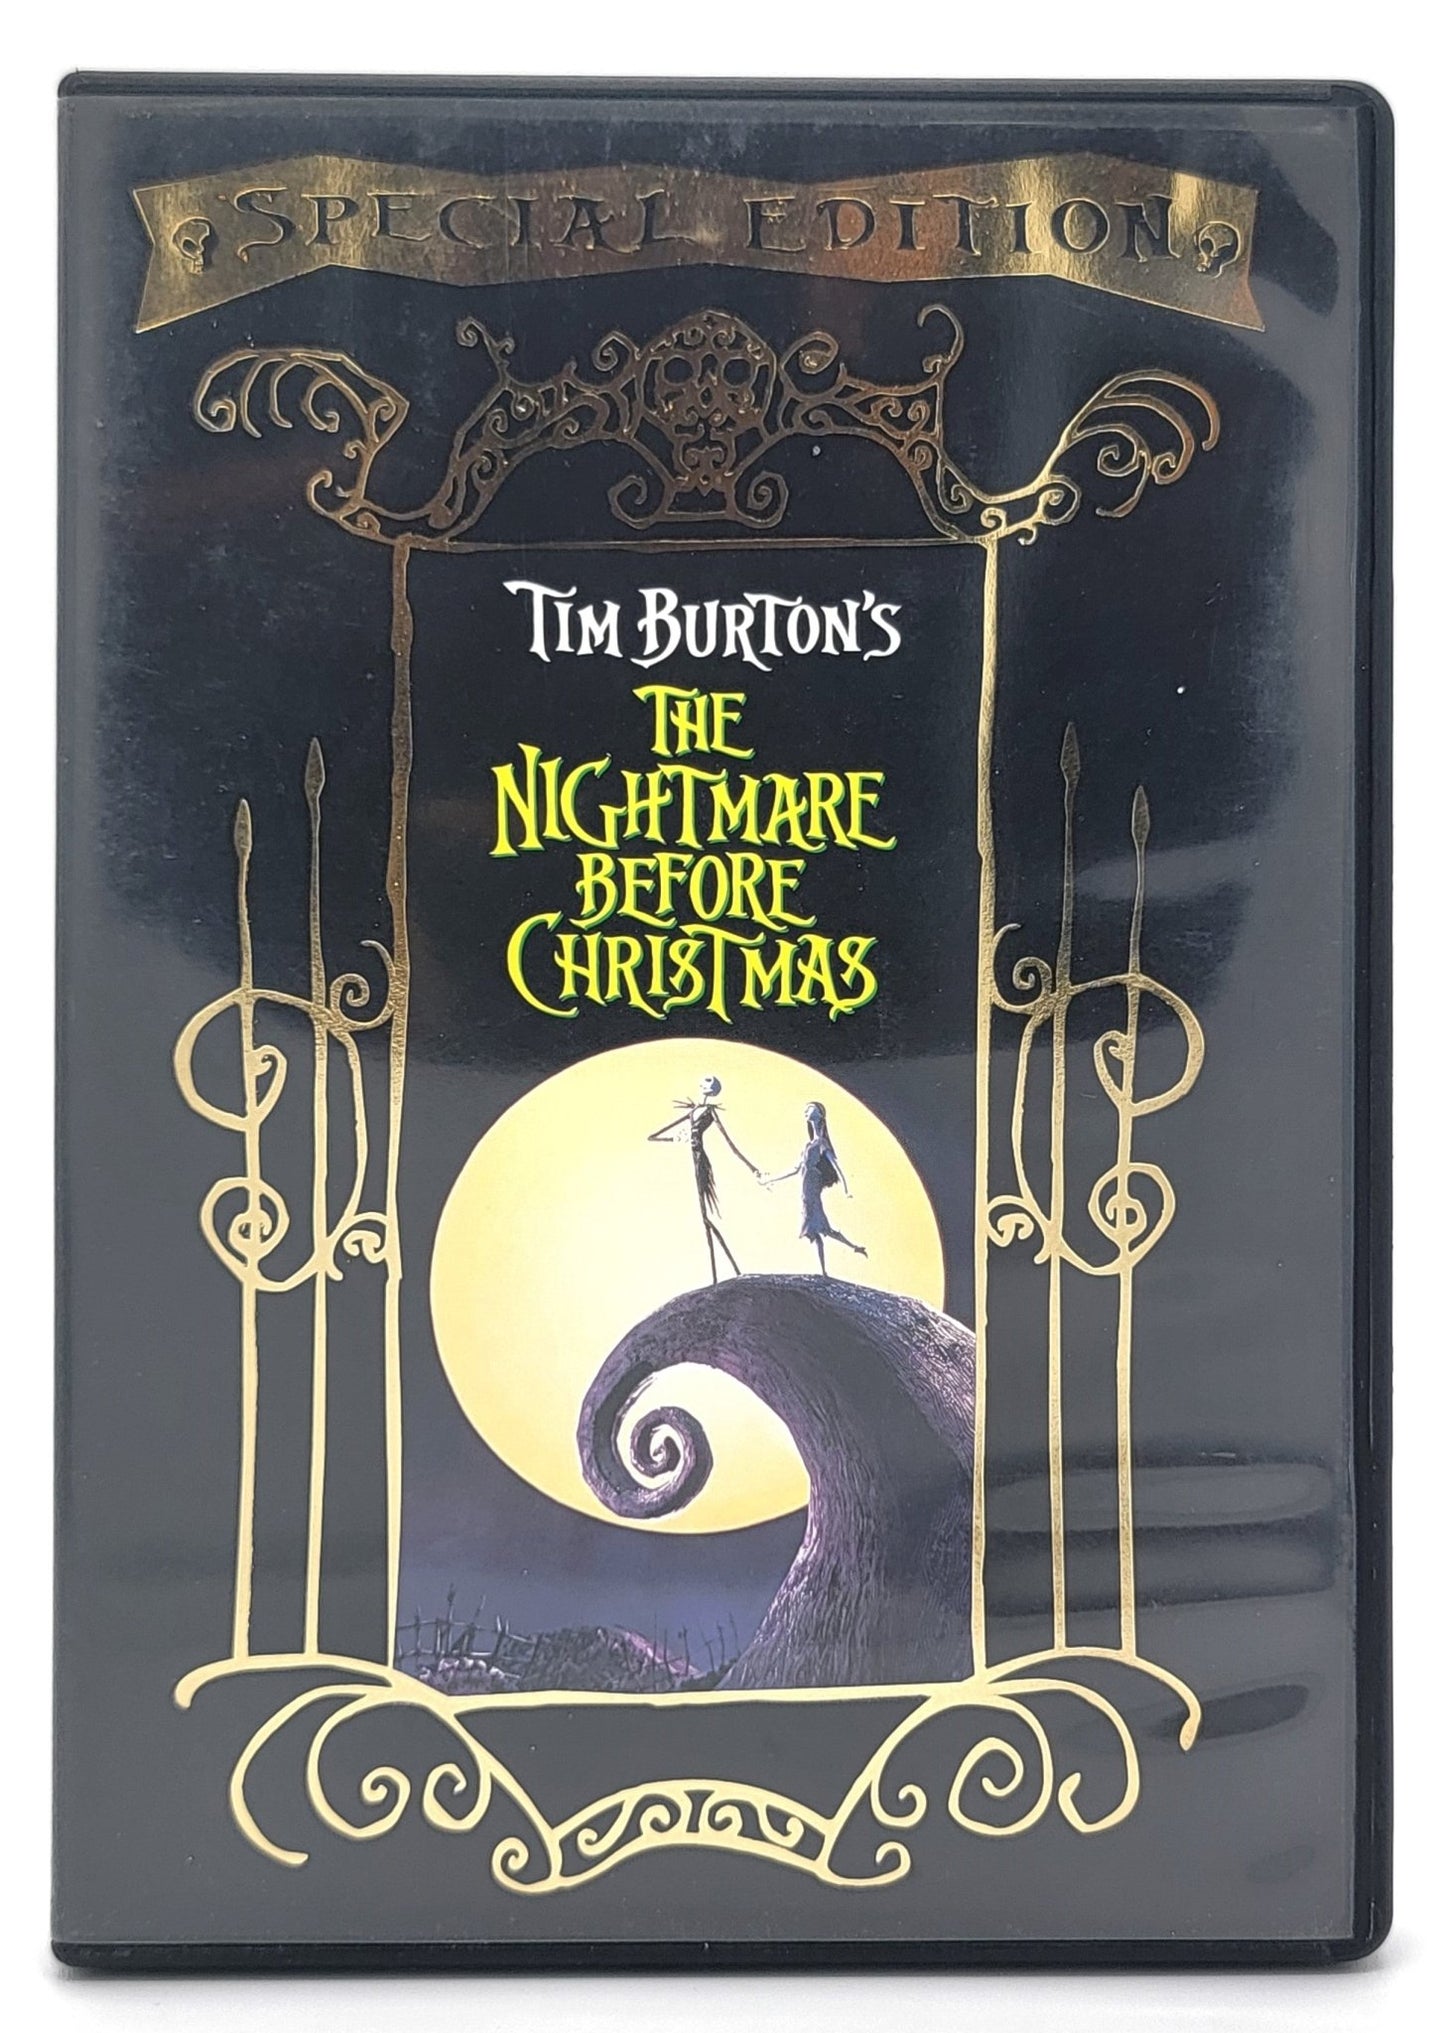 Touchstone Pictures - The Nightmare Before Christmas | DVD | Special Edition - Widescreen - DVD - Steady Bunny Shop